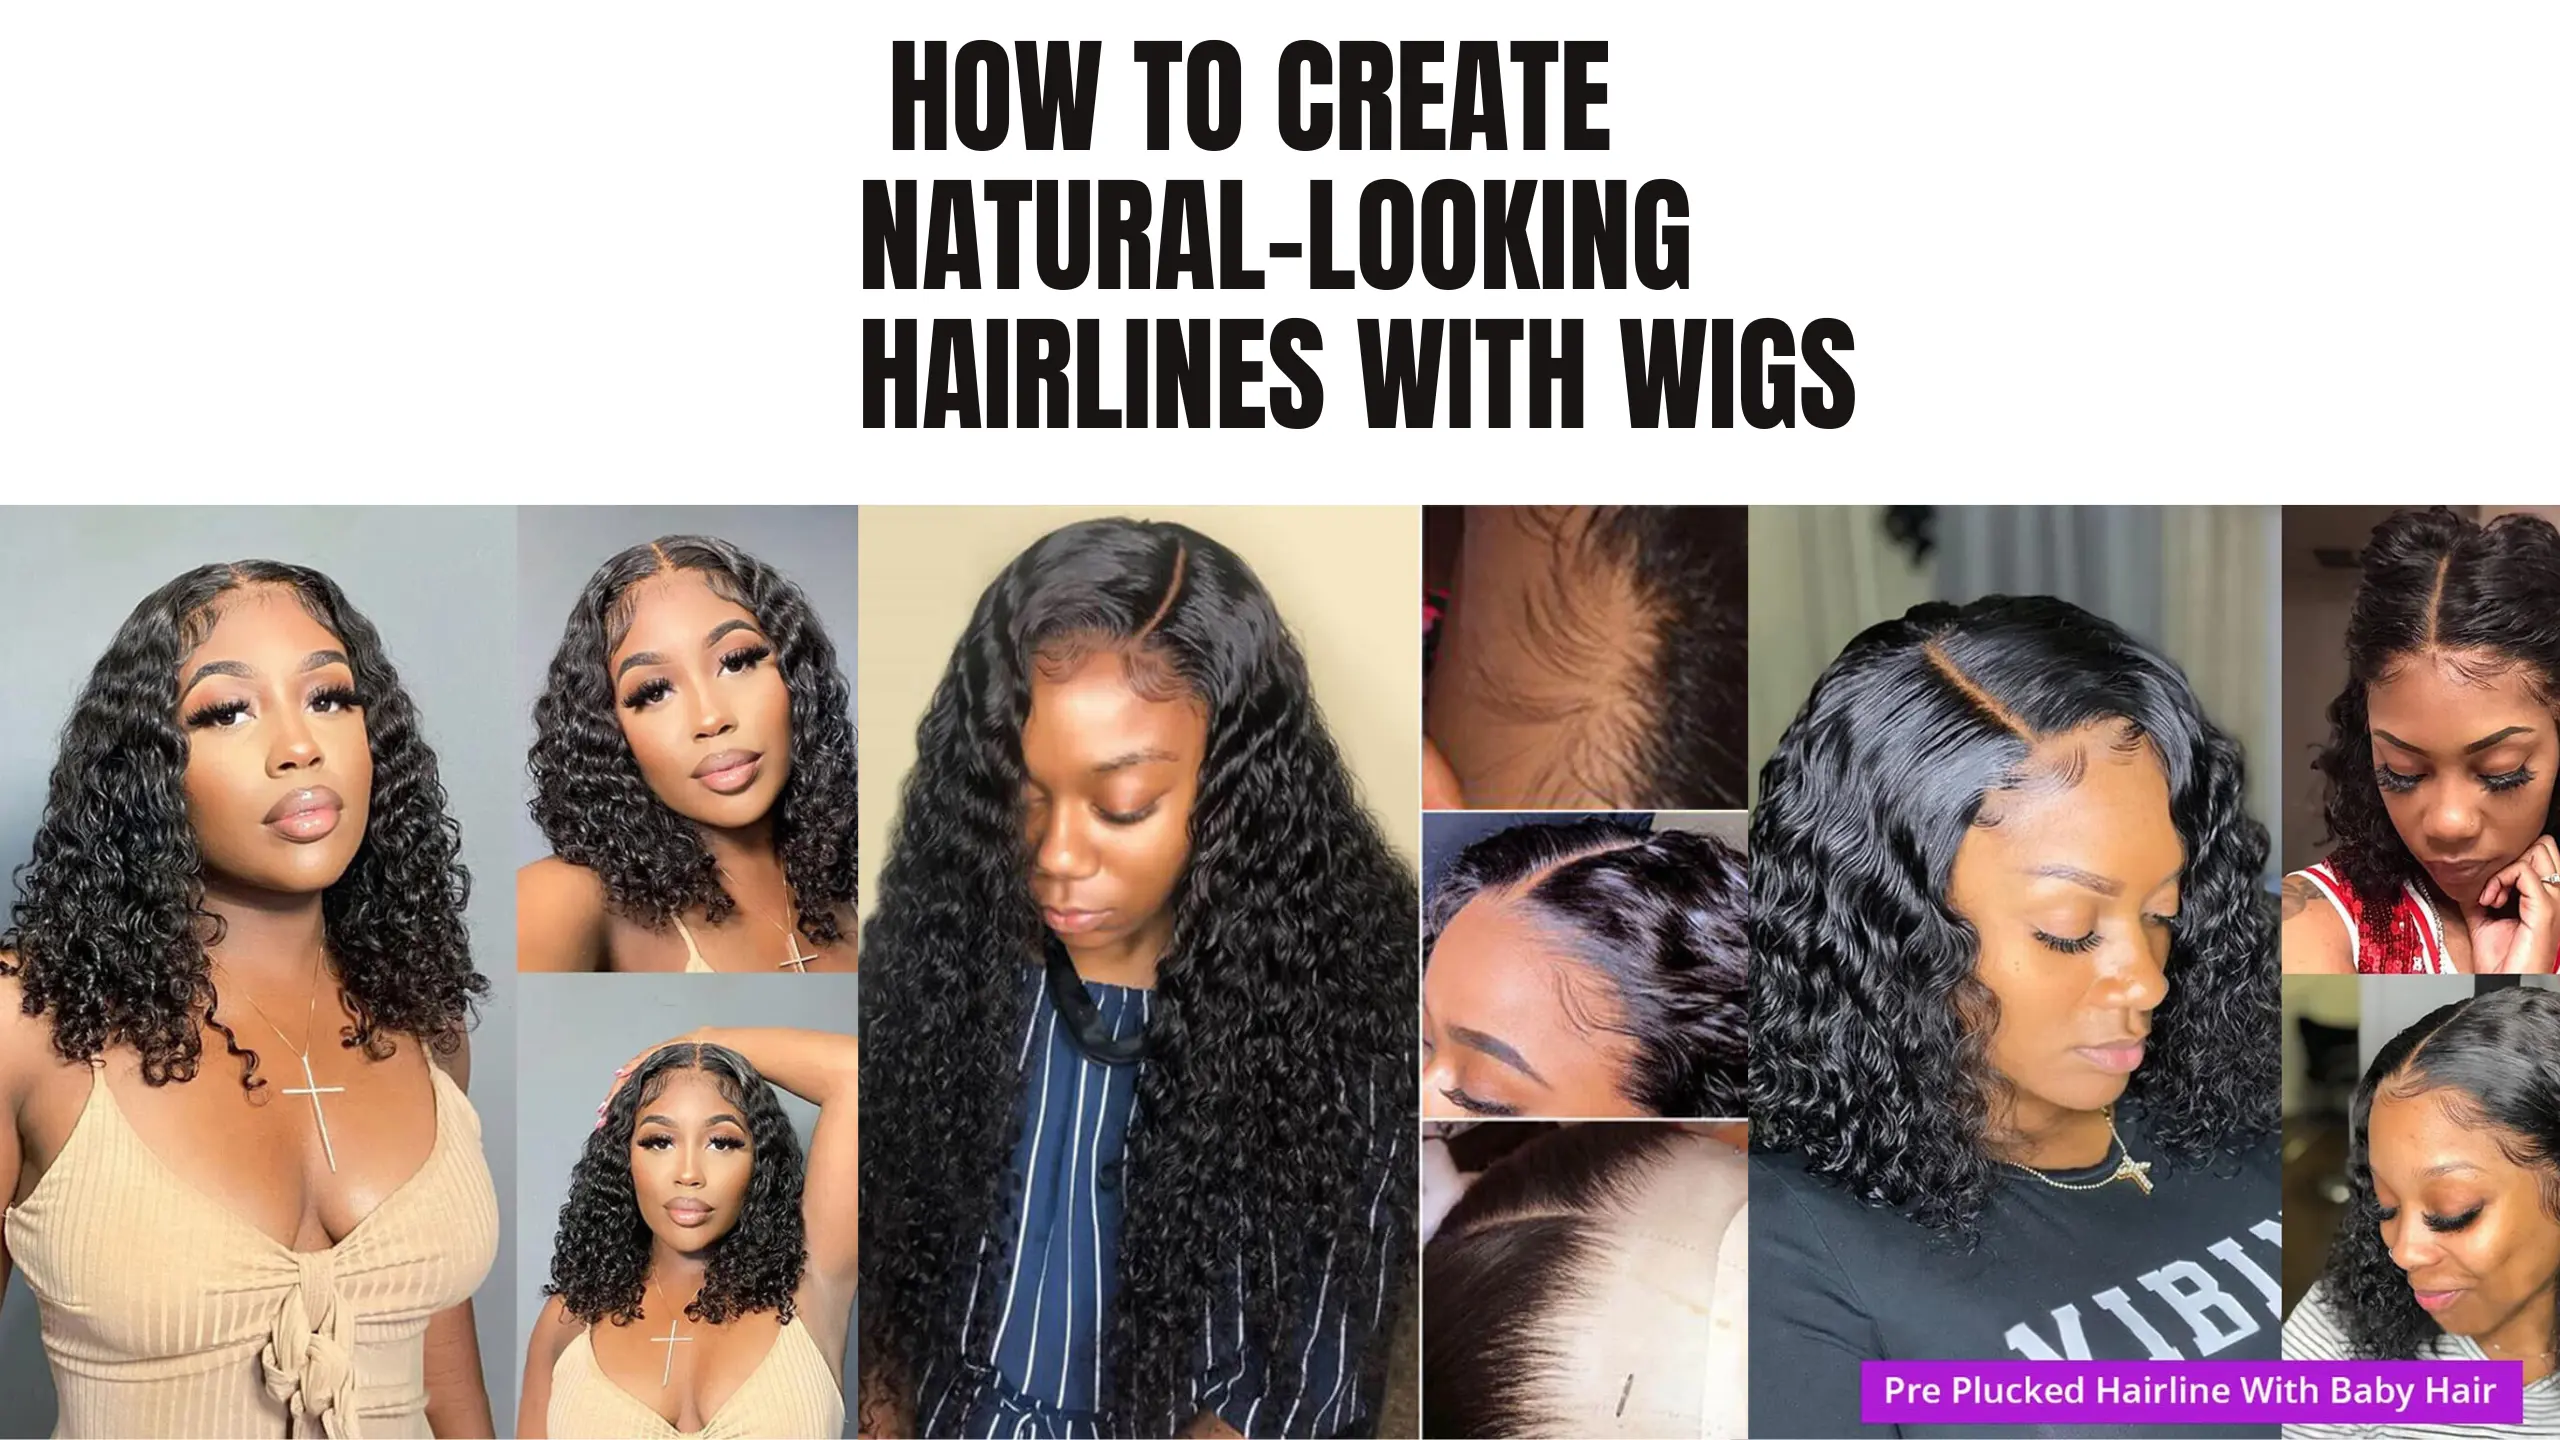 How to Create Natural-Looking Hairlines with Wigs